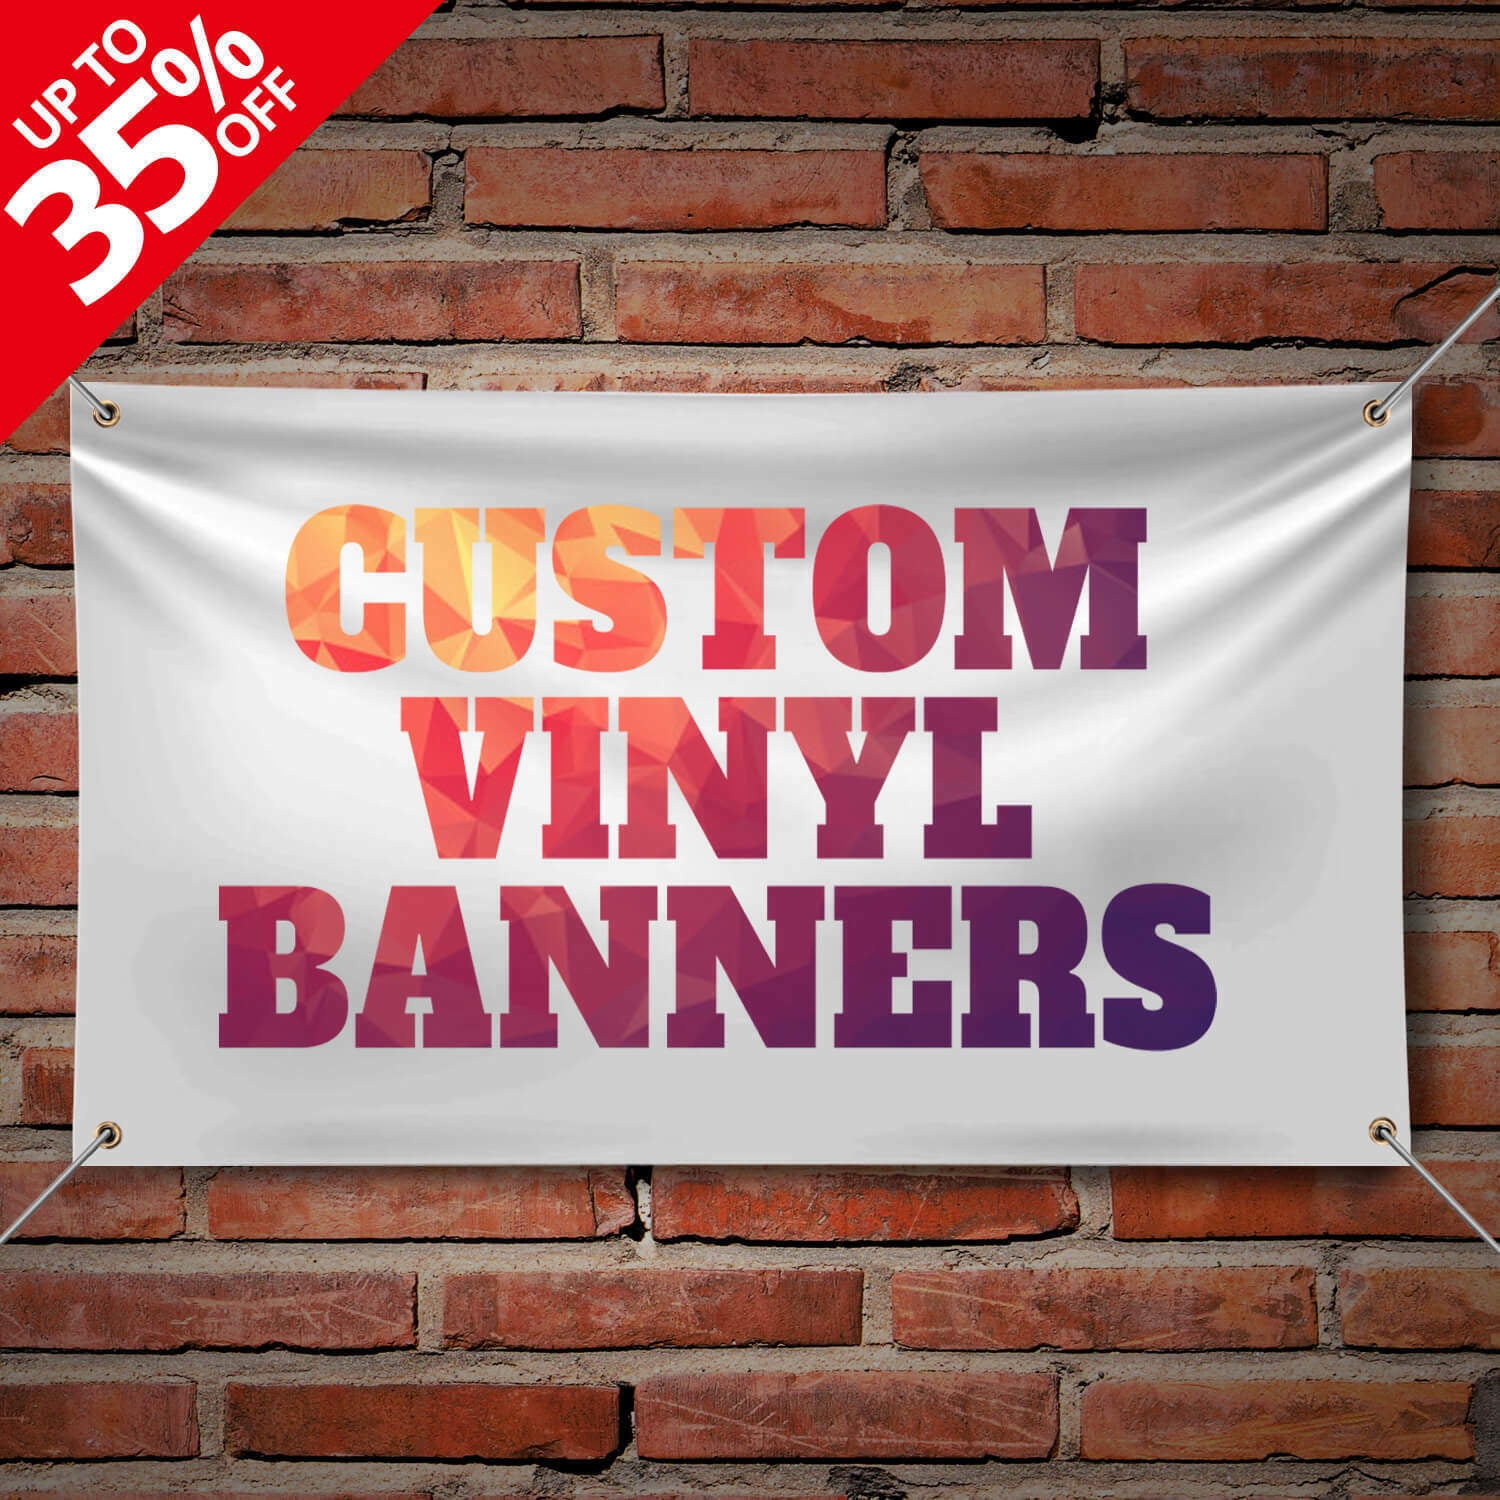 CHEESE NACHOS FOOD Advertising Vinyl Banner Flag Sign Many Sizes PARTIES SPICY 